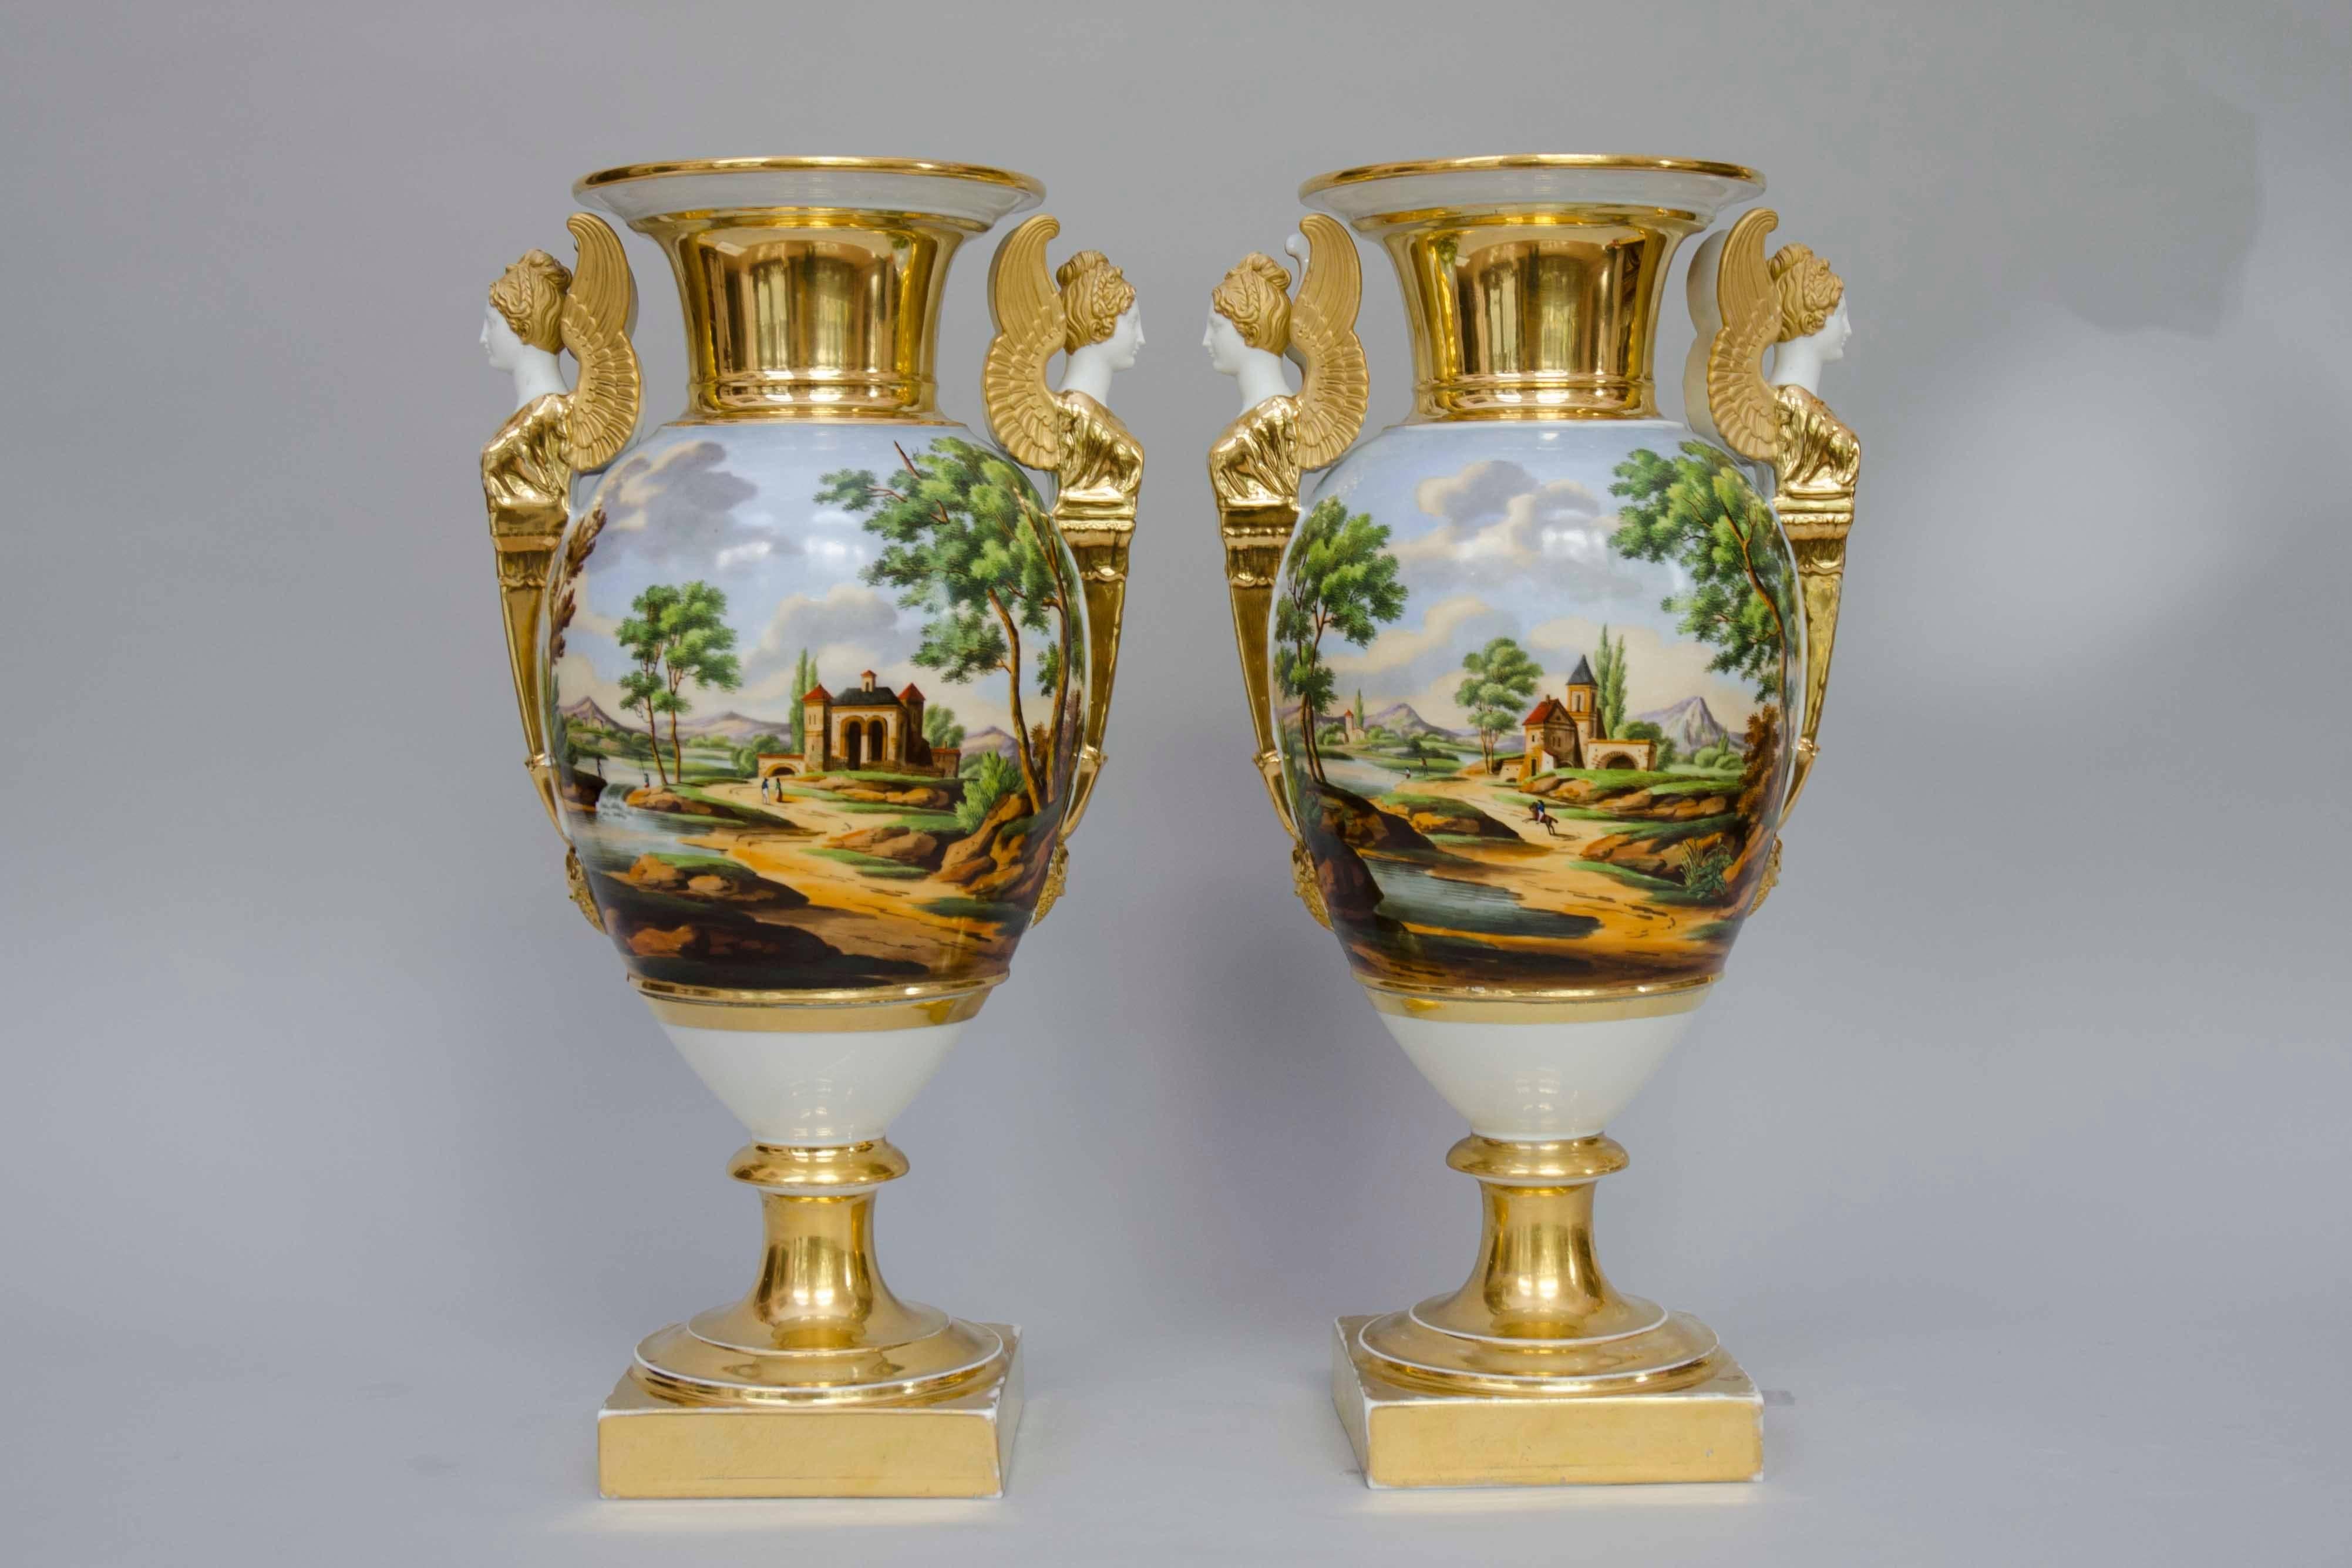 Large pair of very decorative 19th century egg shaped vases with Italian landscapes on the entire bodies of the vases. Busts of winged women in bisque, partly gilded as handles. Piedouches. Great condition. 
base: H 43cm x W 23 cm - Base: 13cm x